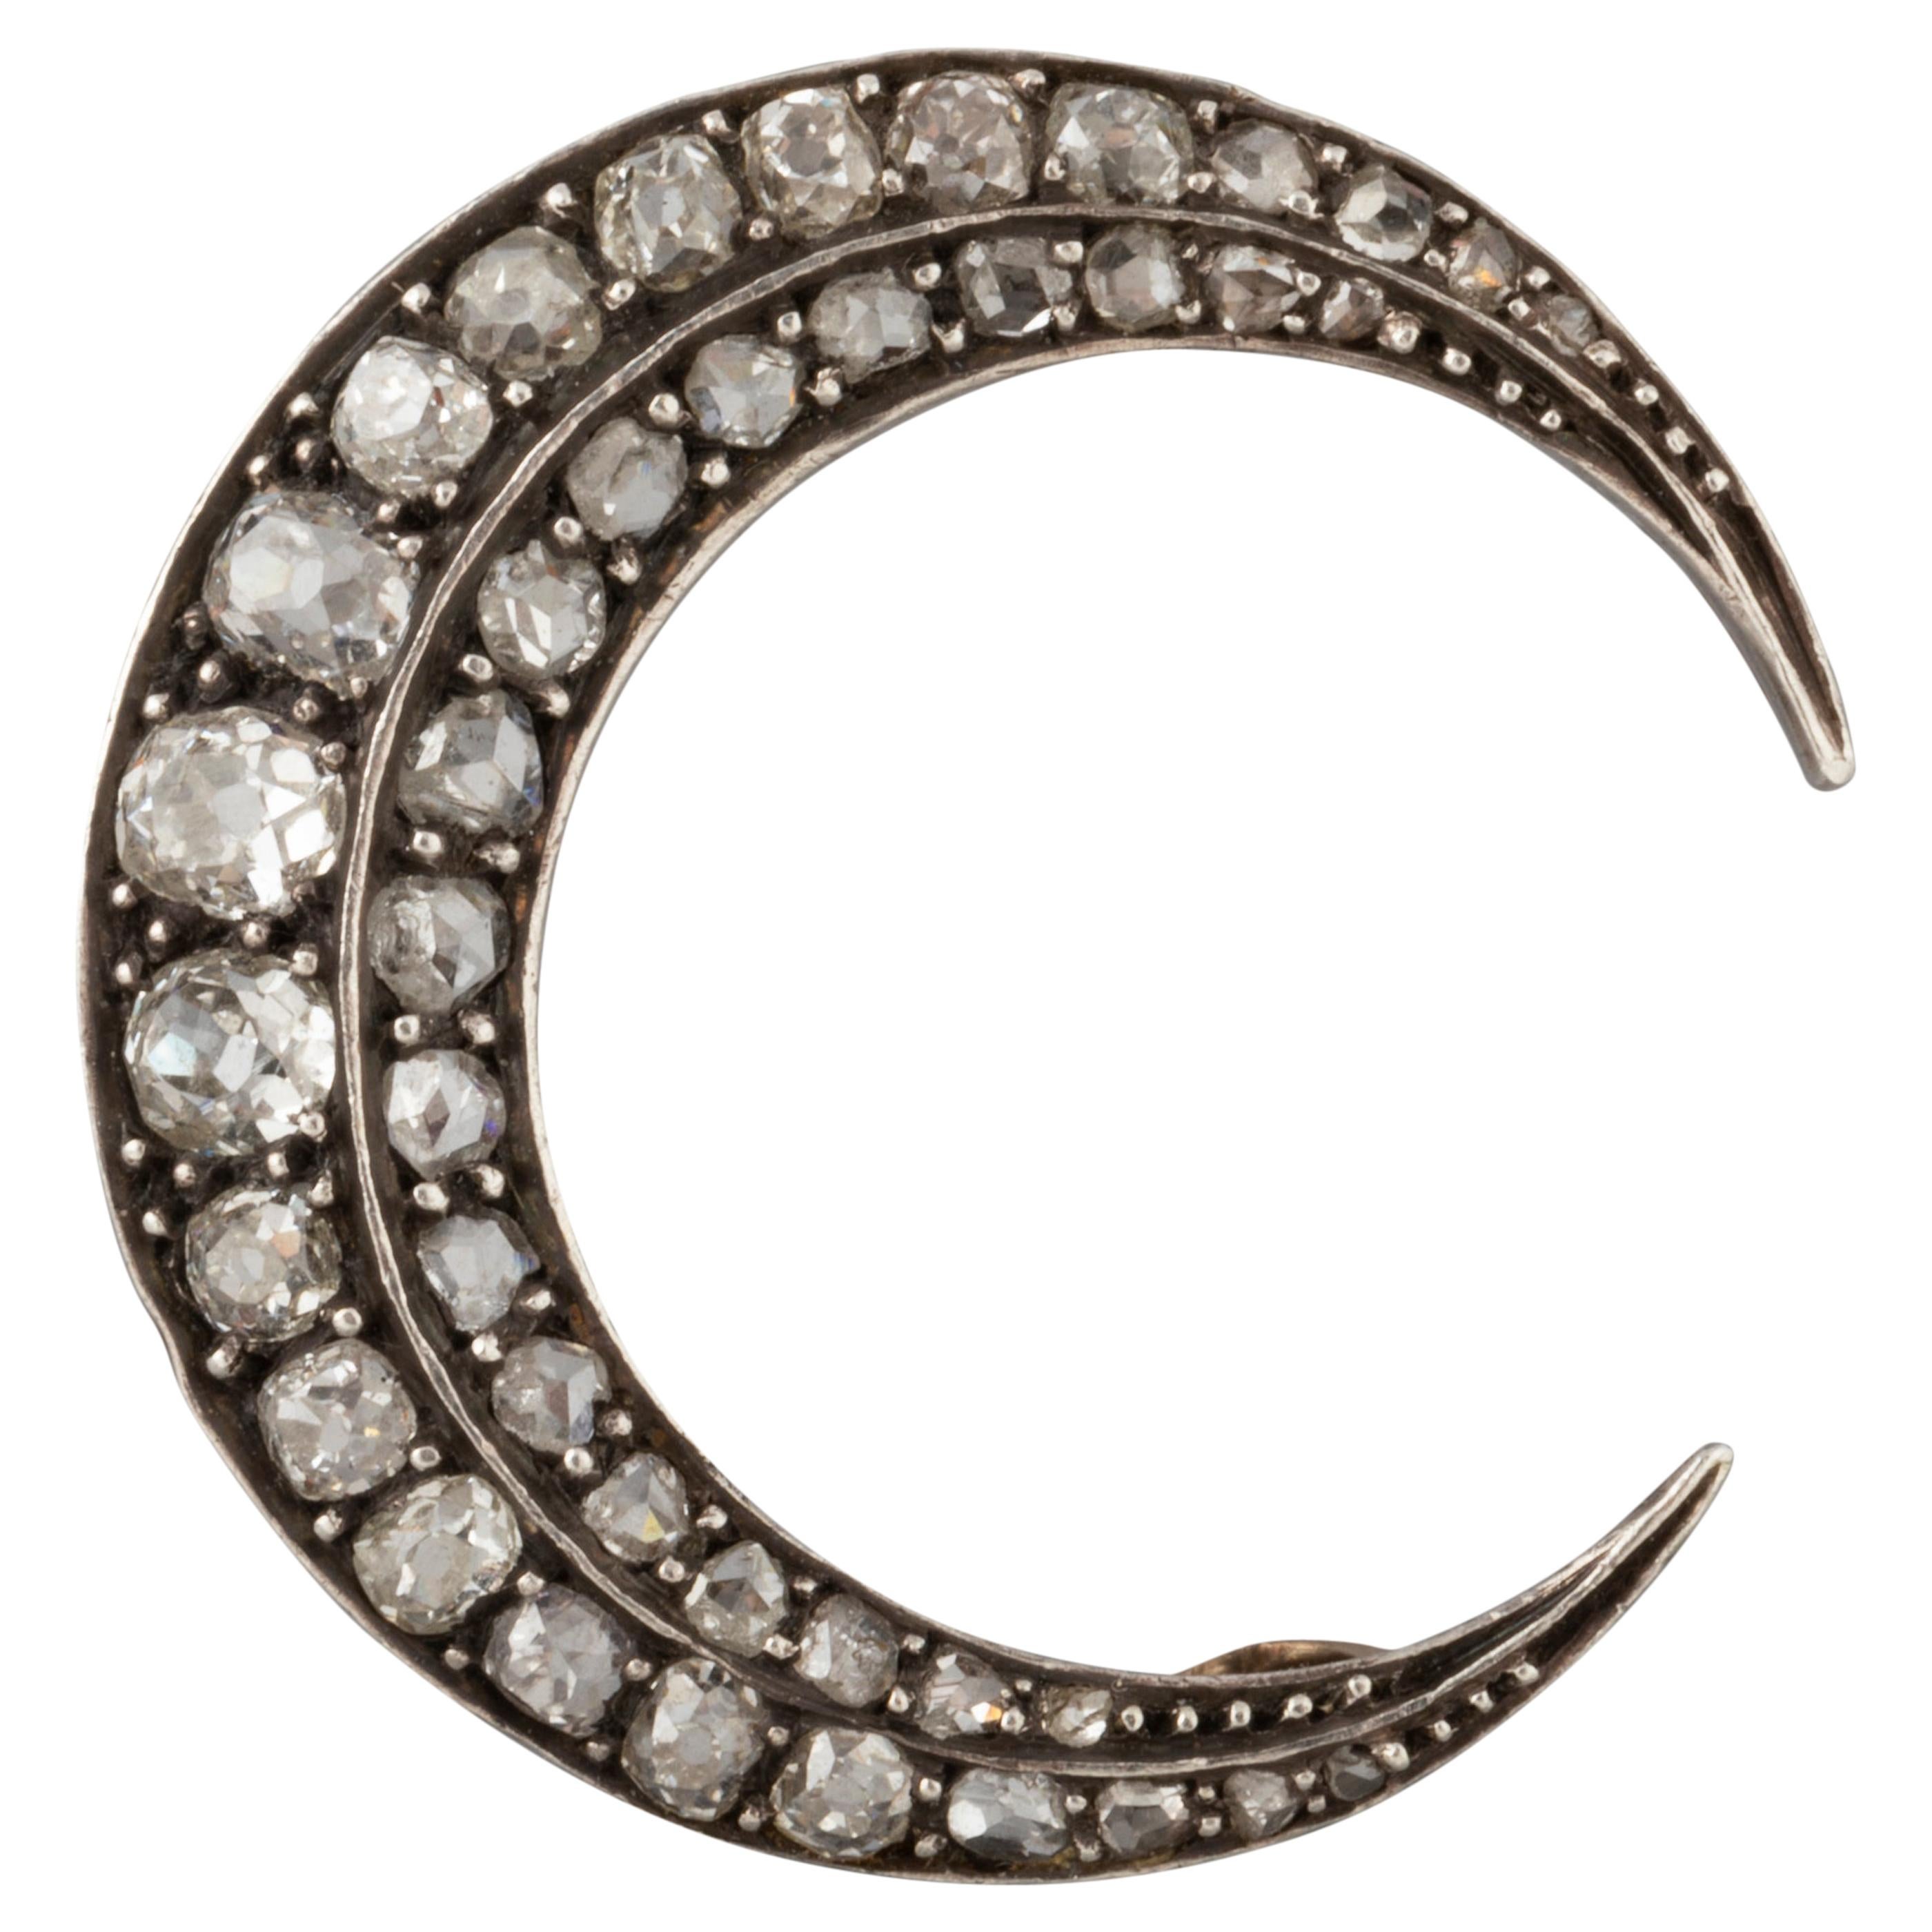 2 Carat Diamonds Antique French Crescent Brooch